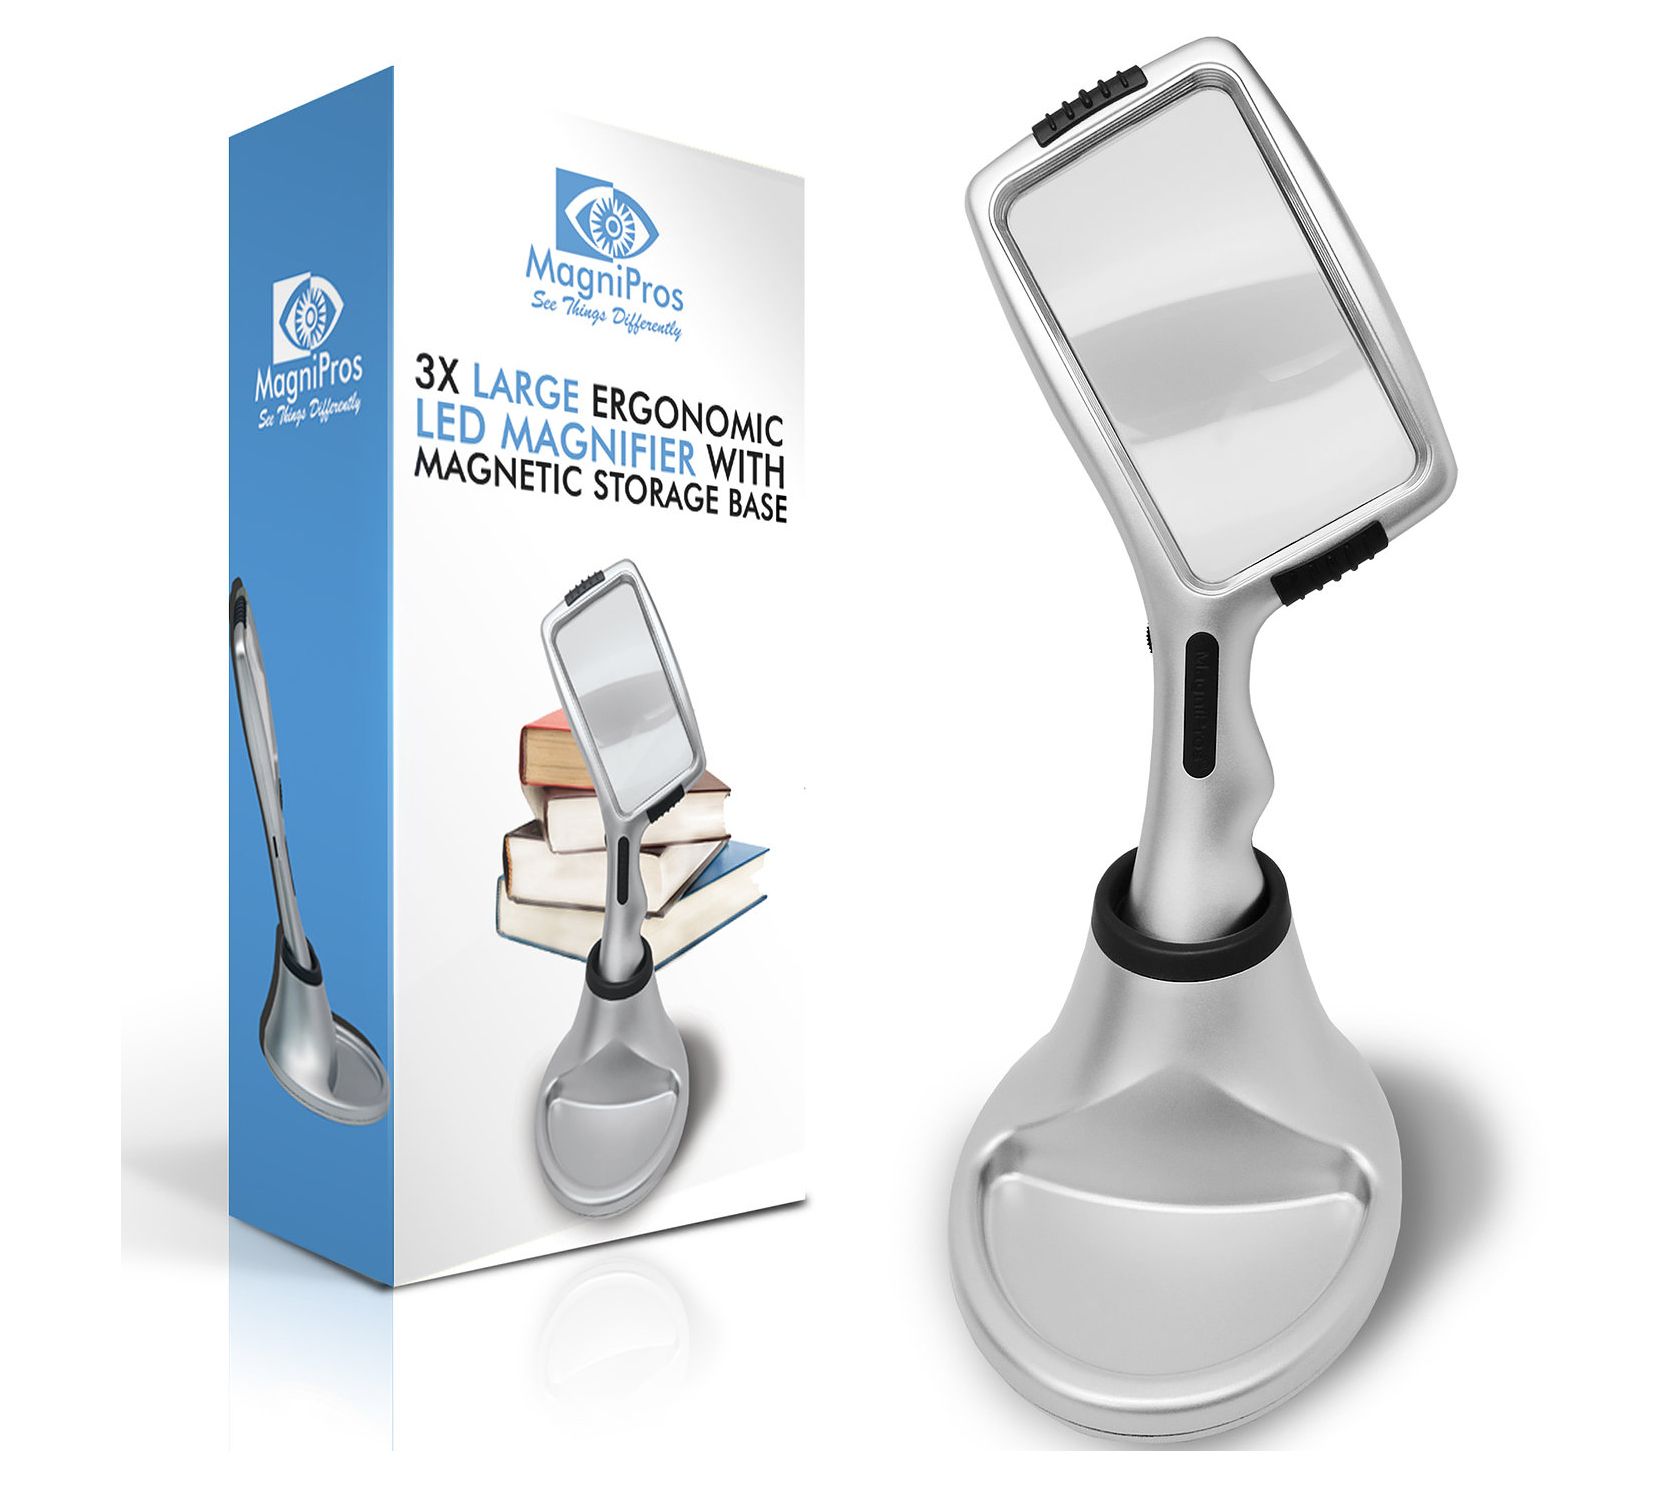 5X/11X Magnifying Glass Stand Foldable Dimmable Magnifier With Light 8 LED  LAMP